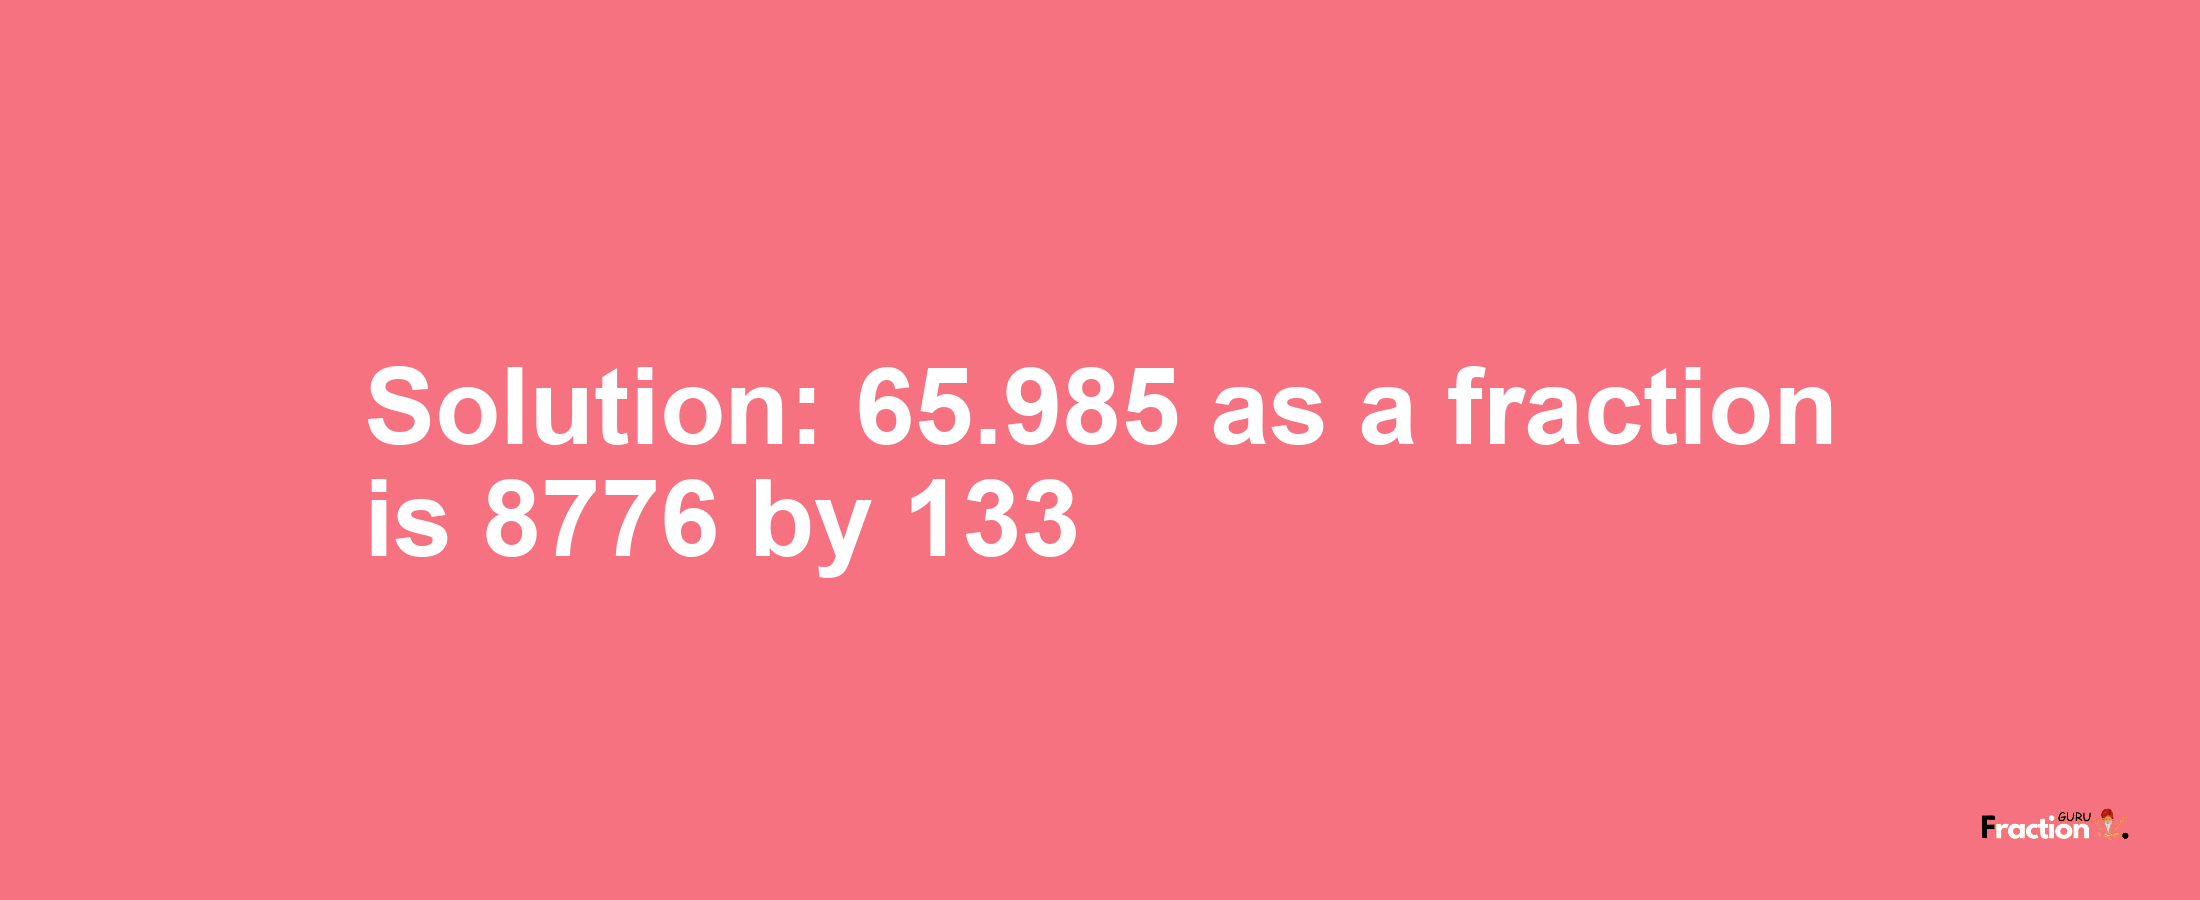 Solution:65.985 as a fraction is 8776/133